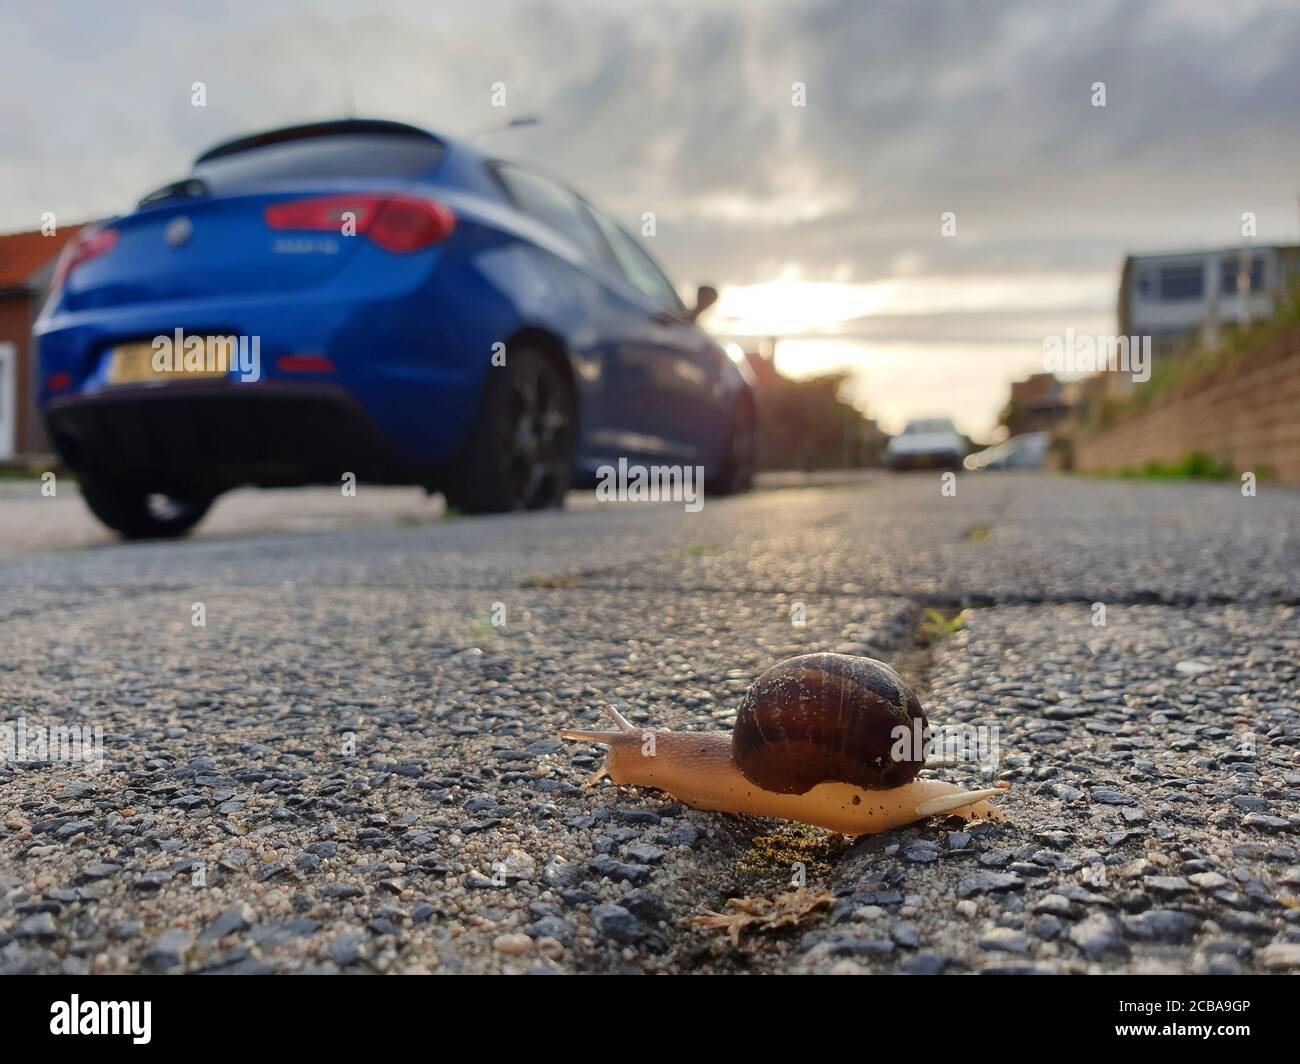 Brown garden snail, Brown gardensnail, Common garden snail, European brown snail (Cornu aspersum, Helix aspersa, Cryptomphalus aspersus, Cantareus aspersus), crossing a road in a residental area, side view, Netherlands Stock Photo